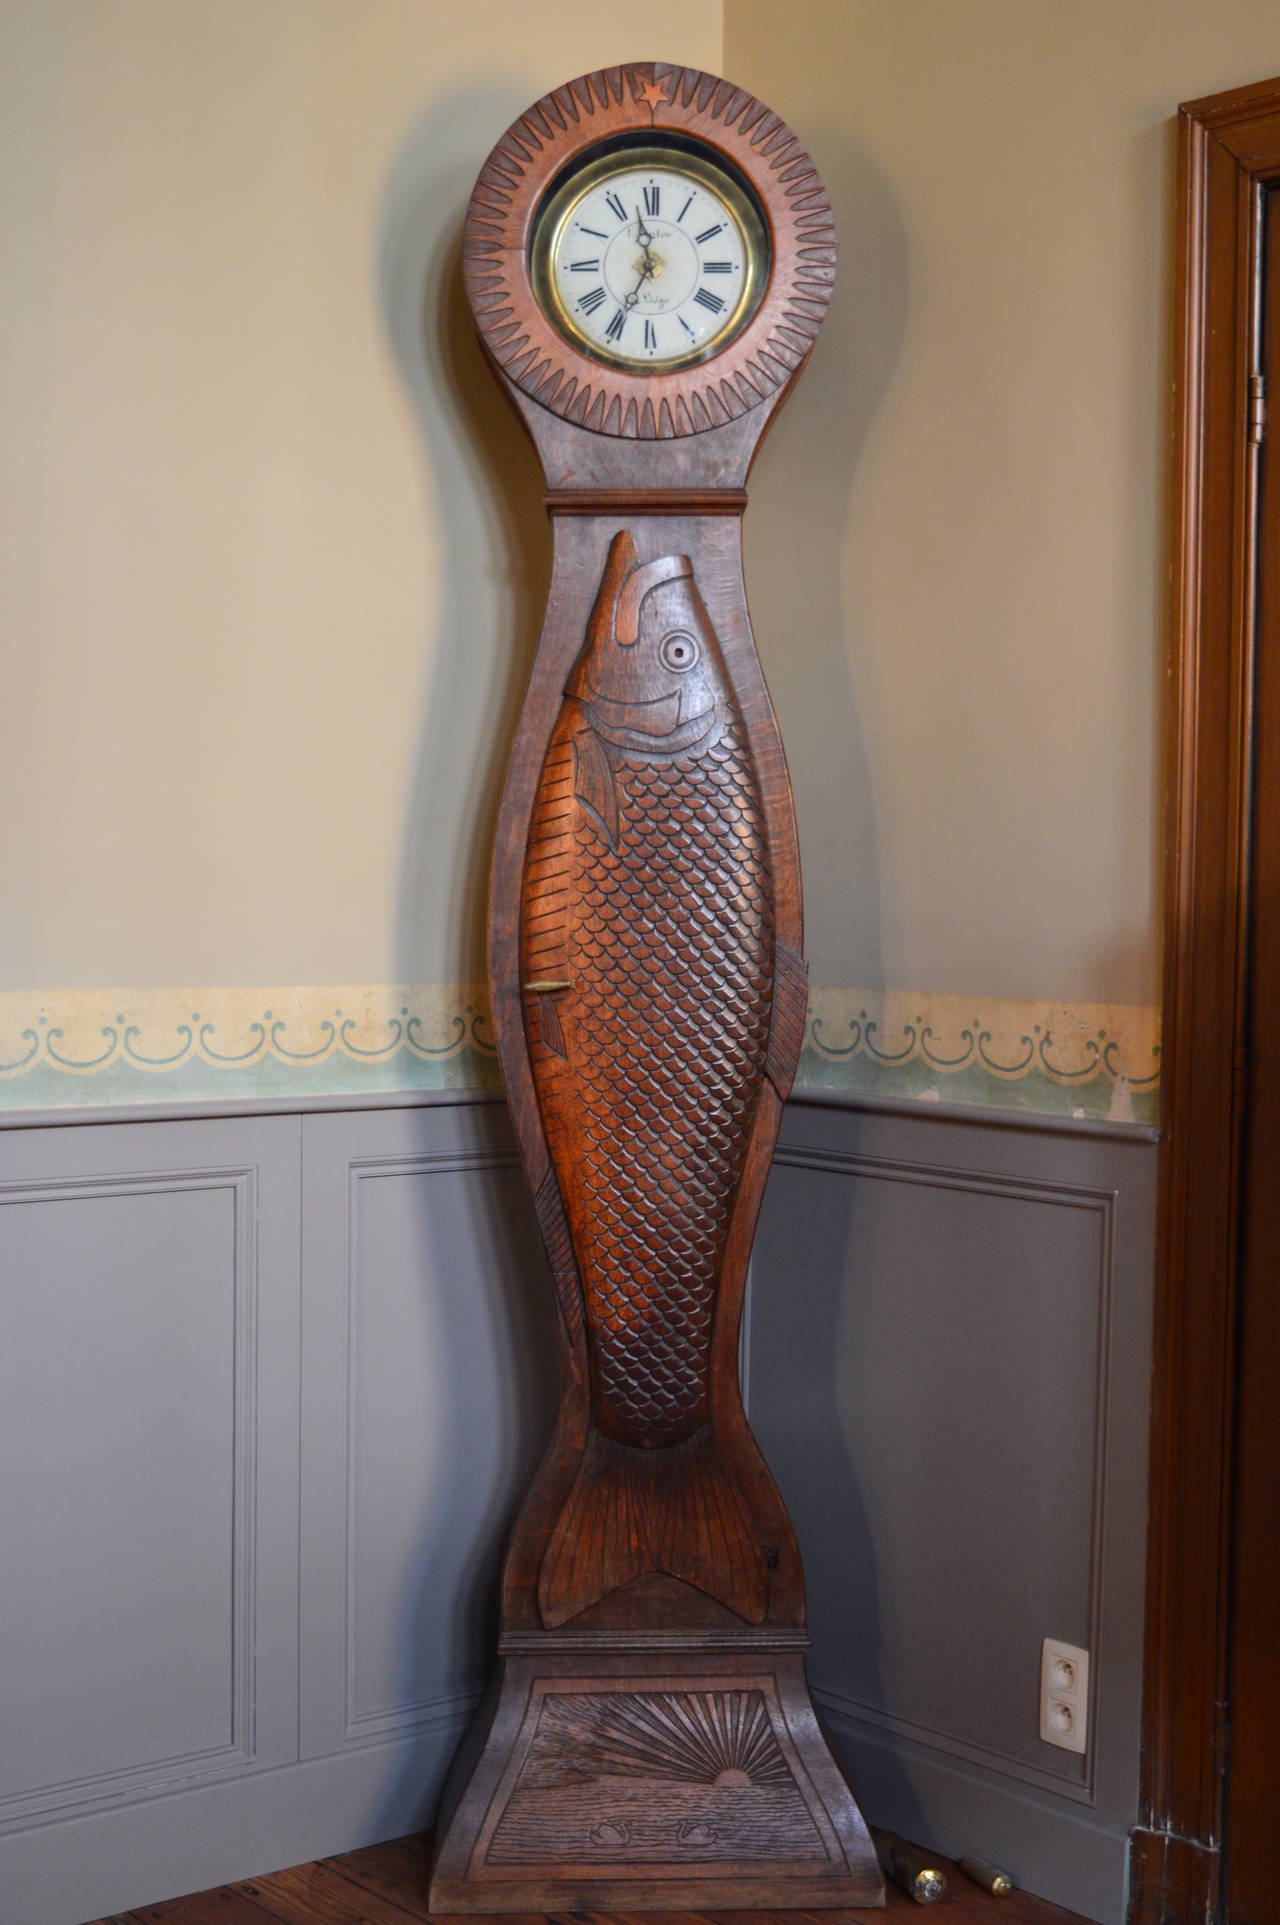 This extremely unusual tall case clock was made in the last half of the 19th century in Liege , Belgium. The body is carved oak with a very detailed cast bronze fish handle to open the case door.
The clock face is reverse painted glass (églomise)